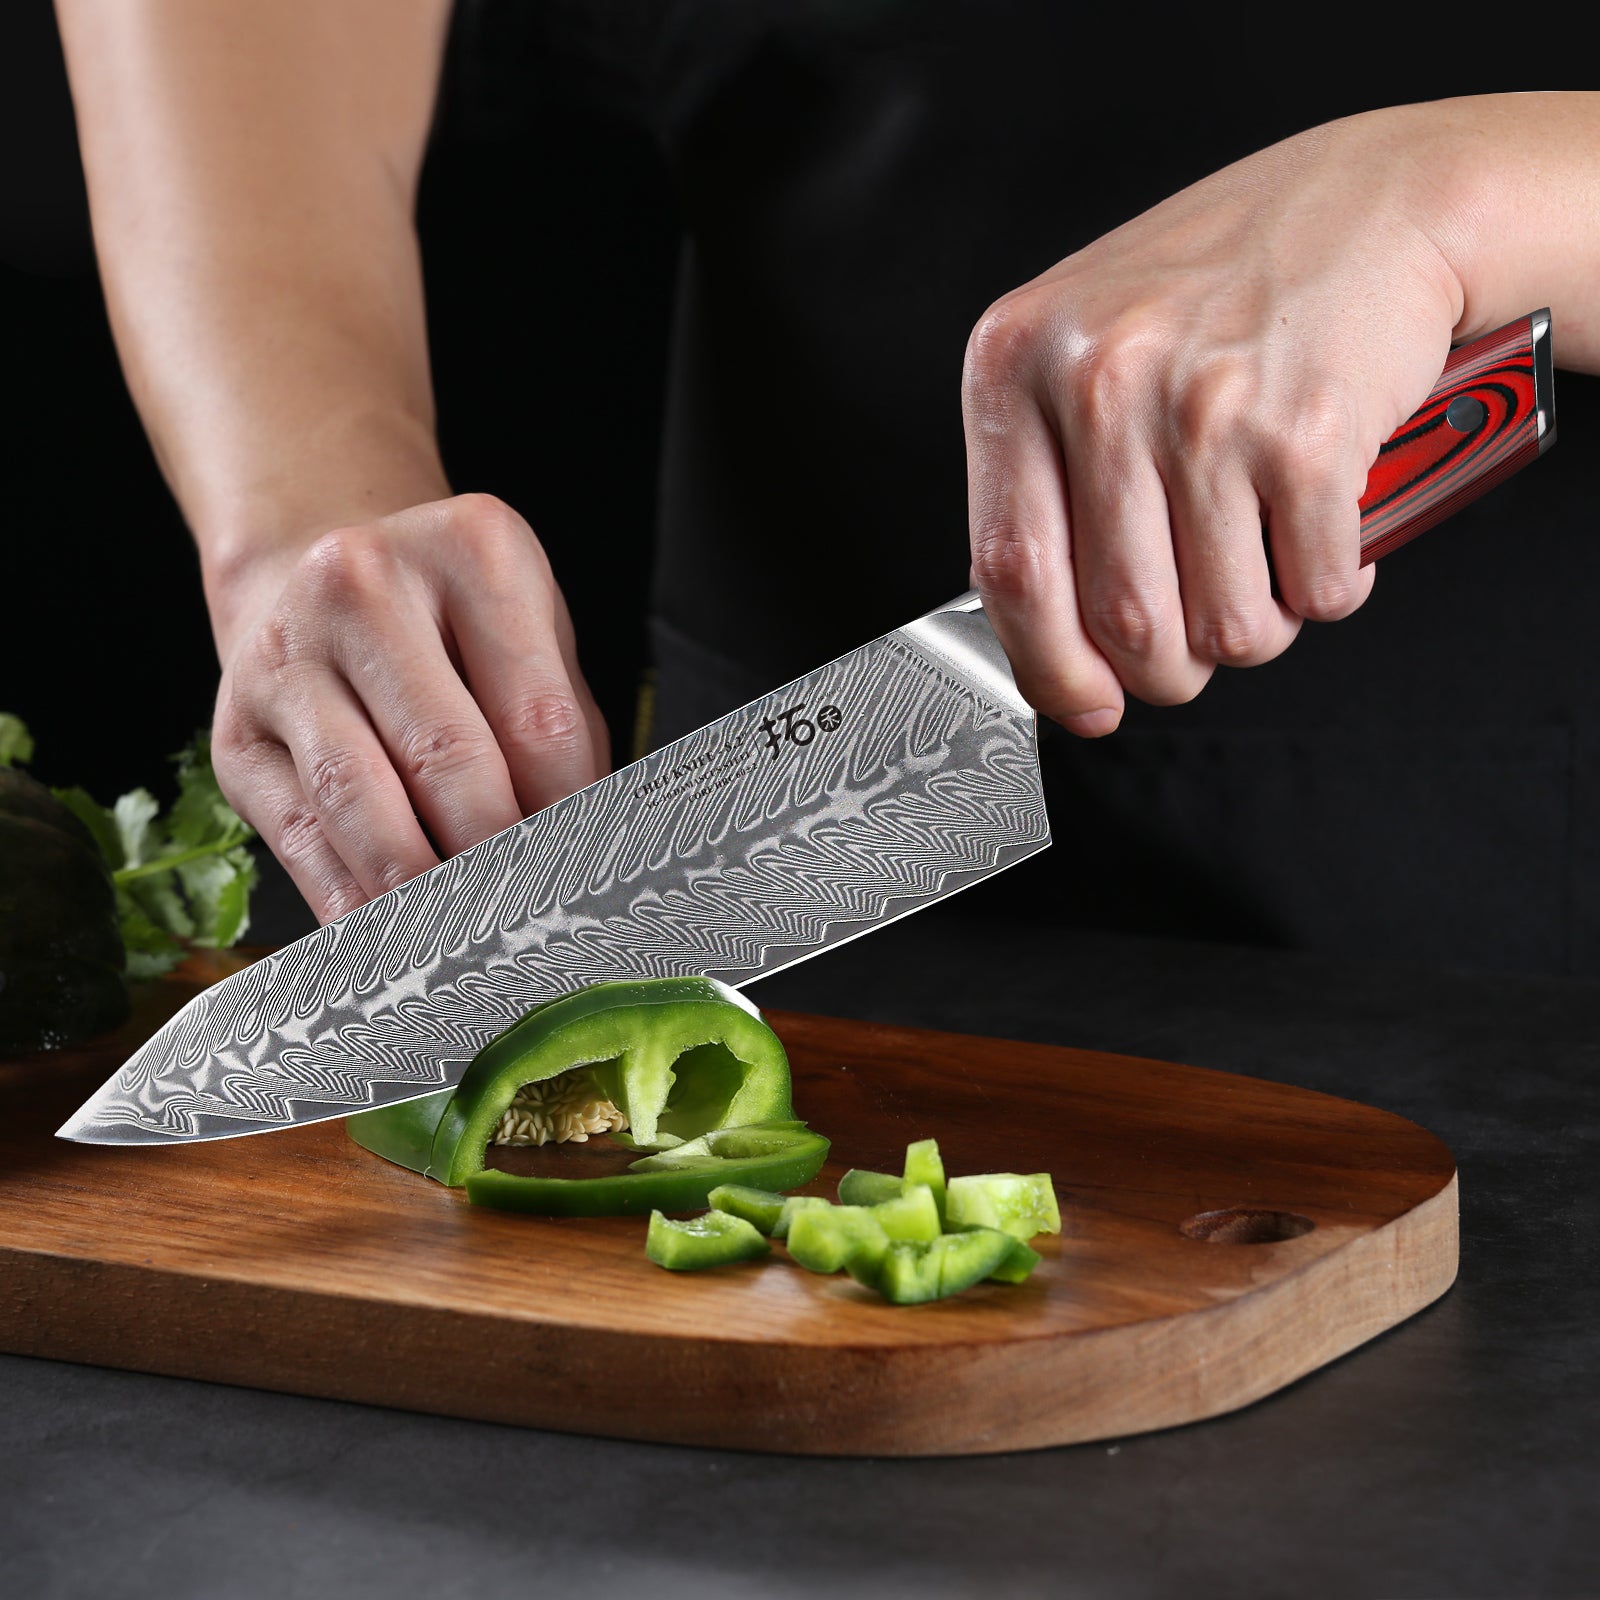 Best Culinary Knife - High carbon steel is often used for high-end kitchen knives because it is wear-resistant, meaning it stays sharper longer.